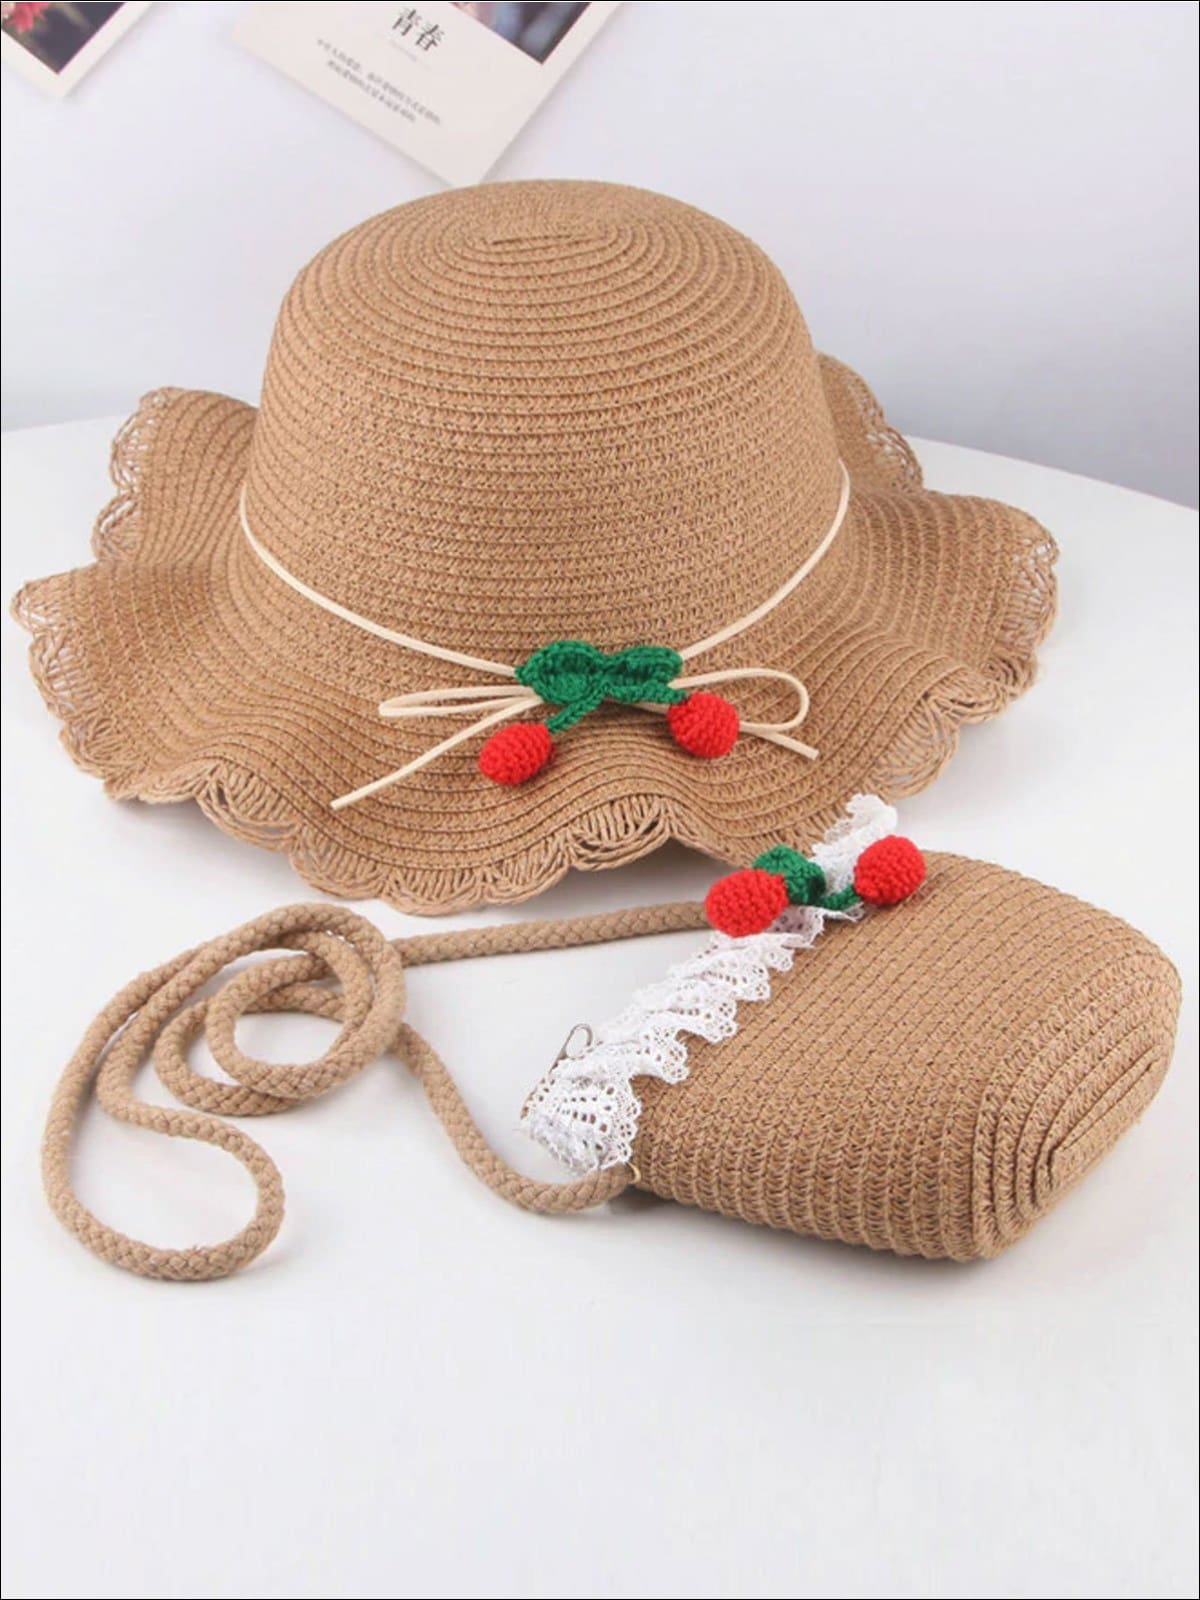 Girls Retro Straw Hat and Matching Mini Purse With Cherries - Tan / One Size - Girls Hats